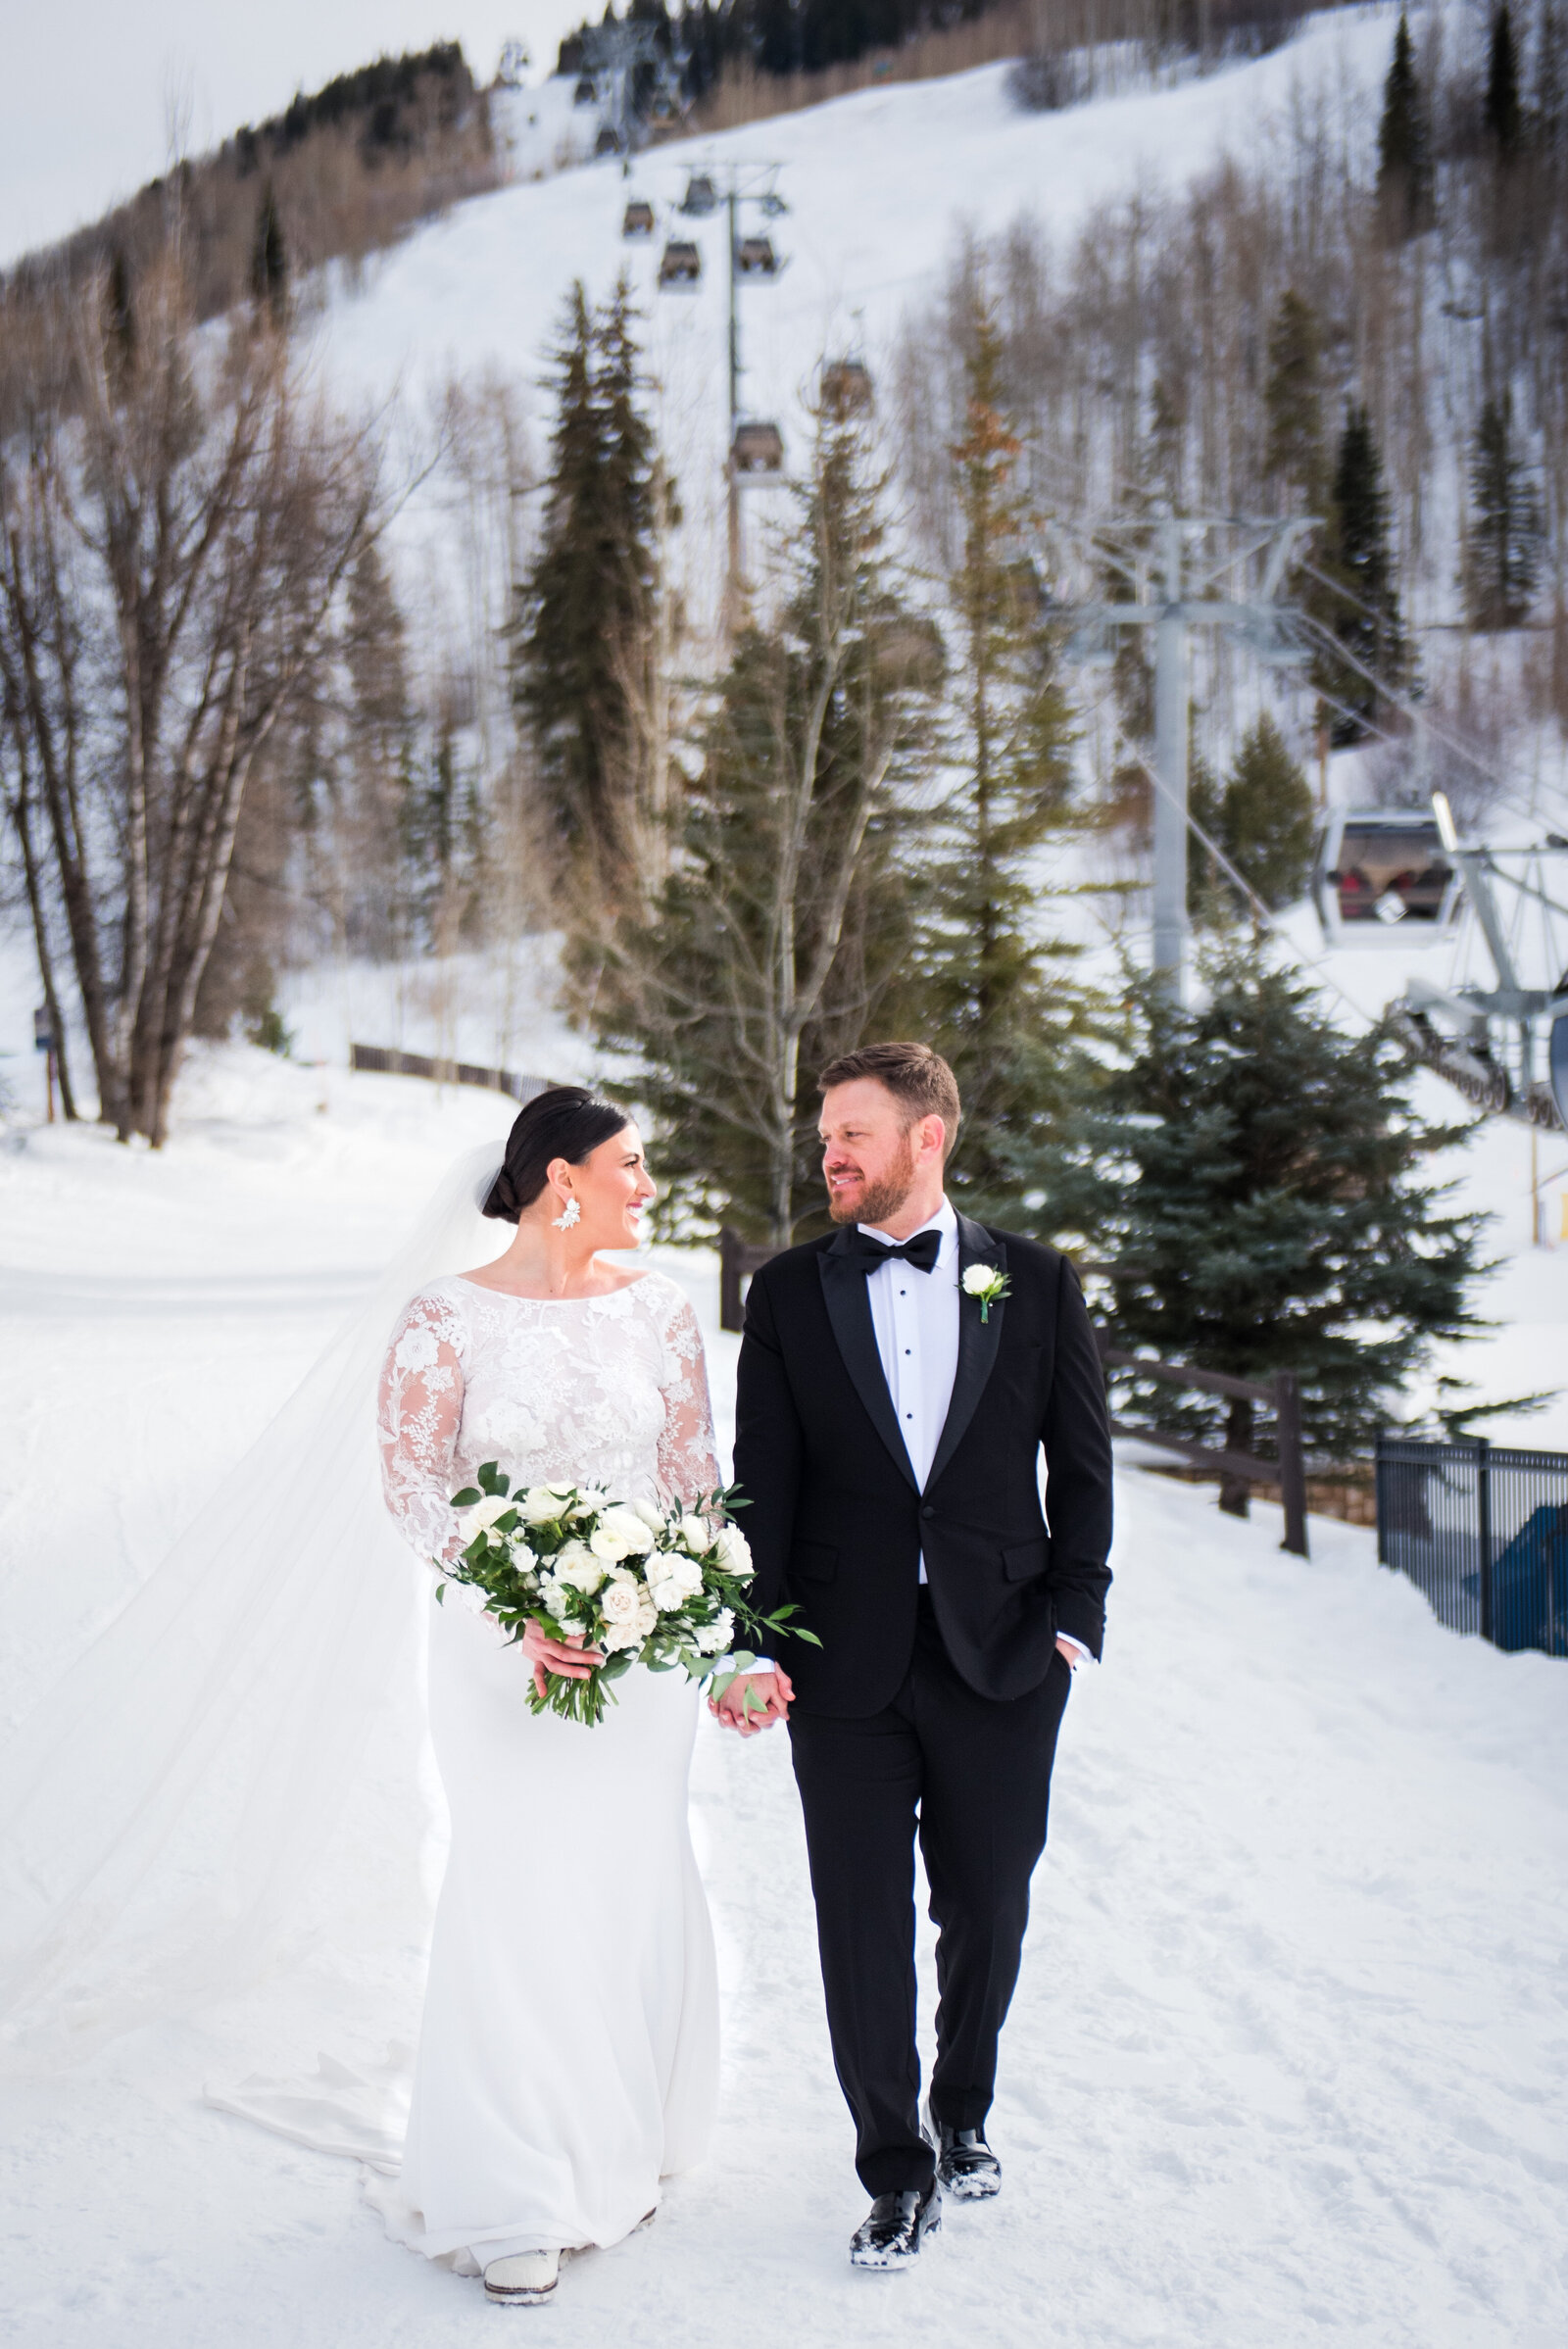 Bride and group walk toward the camera hand-in-hand in a snowy Colorado mountain wedding.